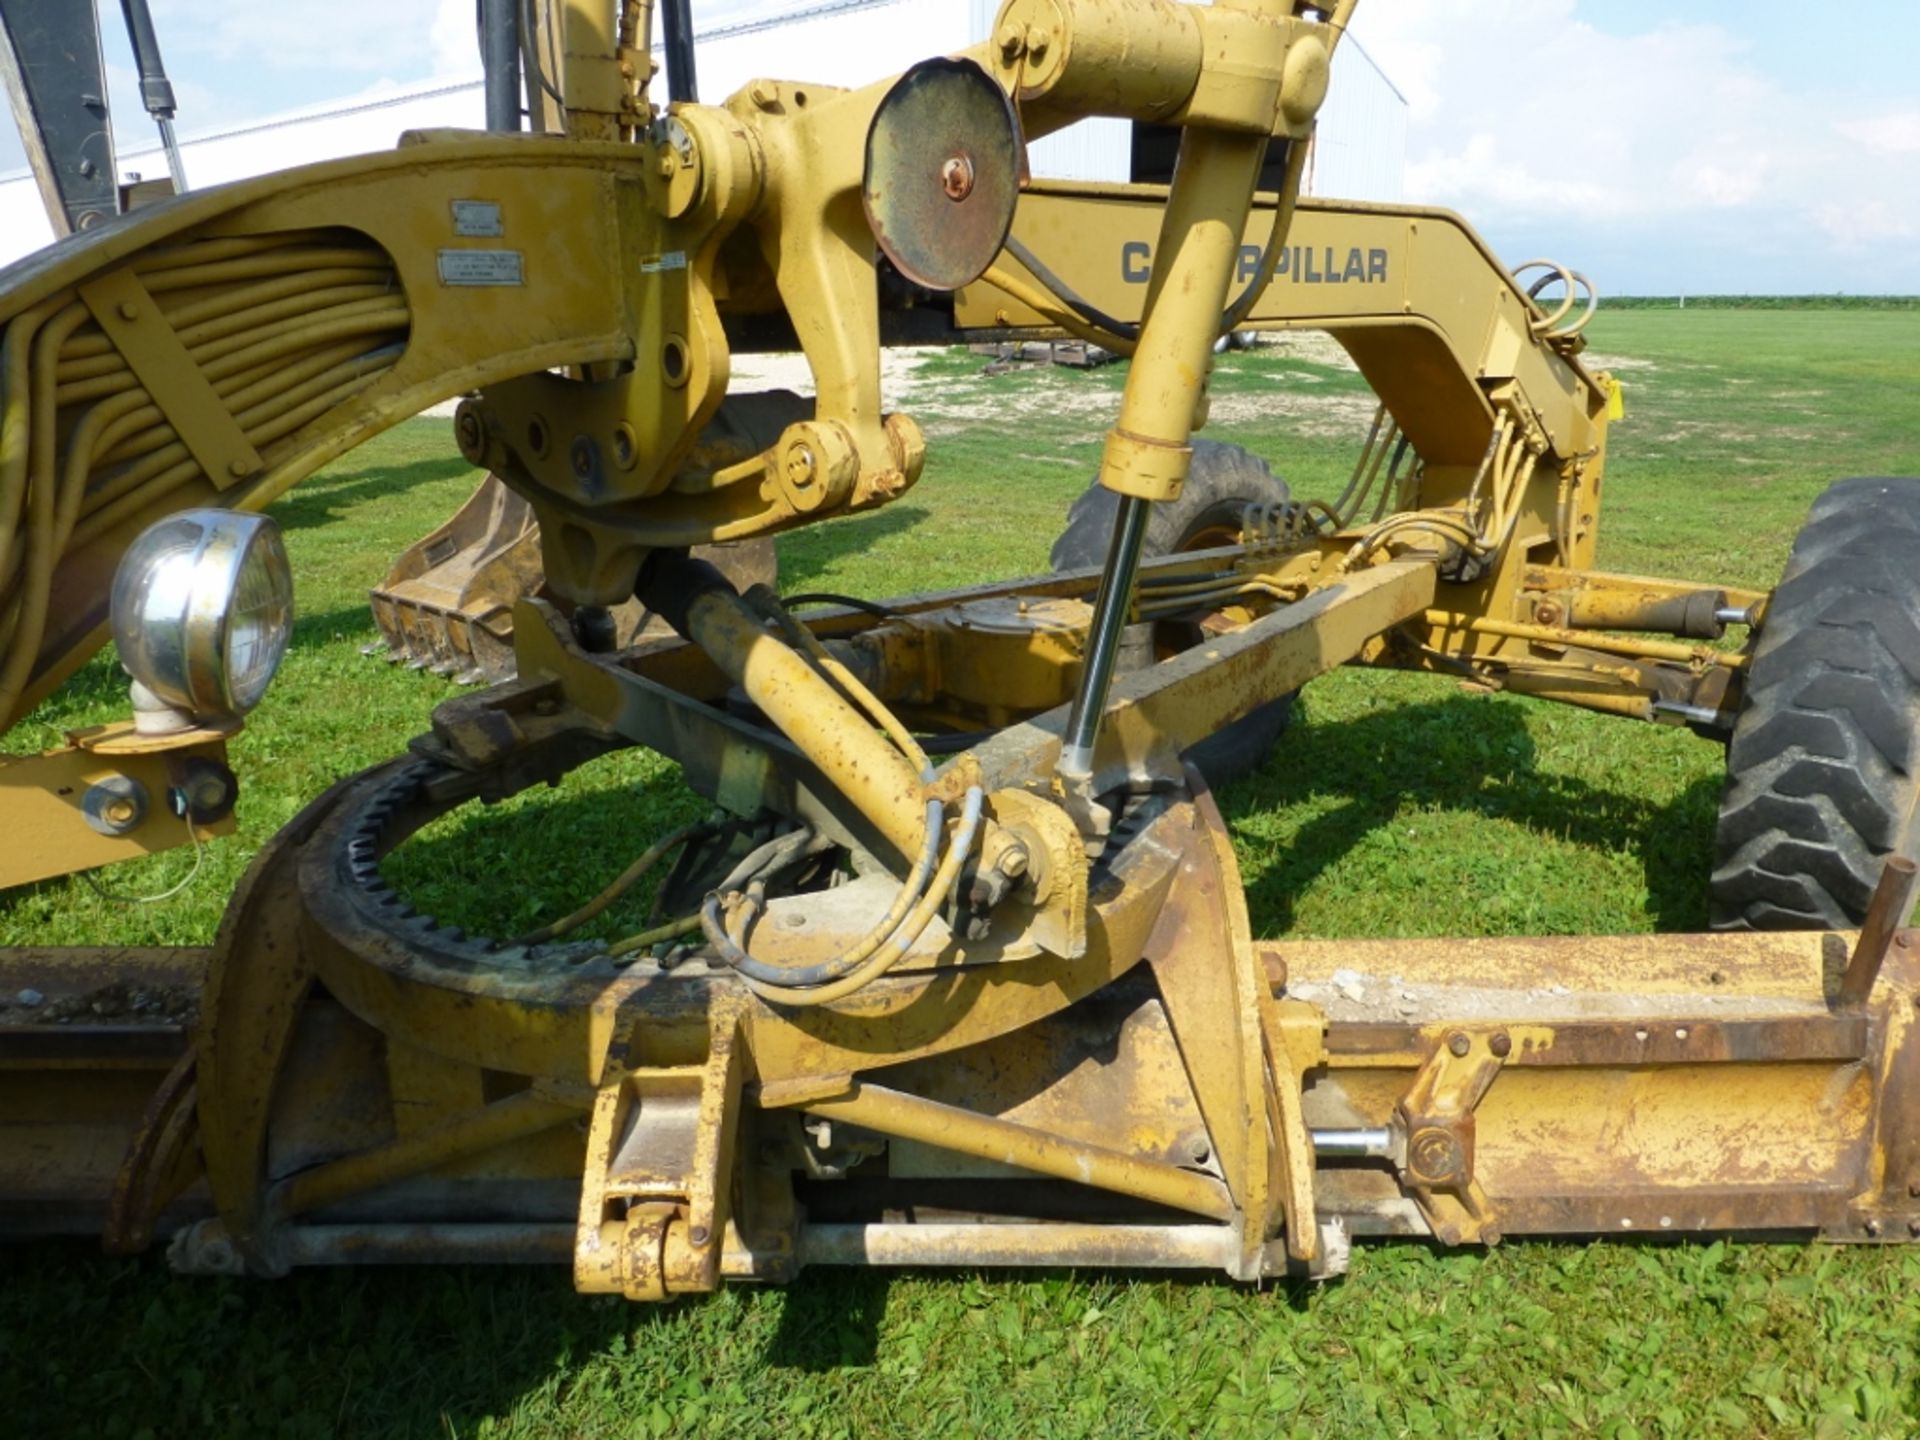 Caterpillar 120G motor grader with 13'10" moldboard se:87v871. Power shift. 7720 unverified hrs. - Image 25 of 27